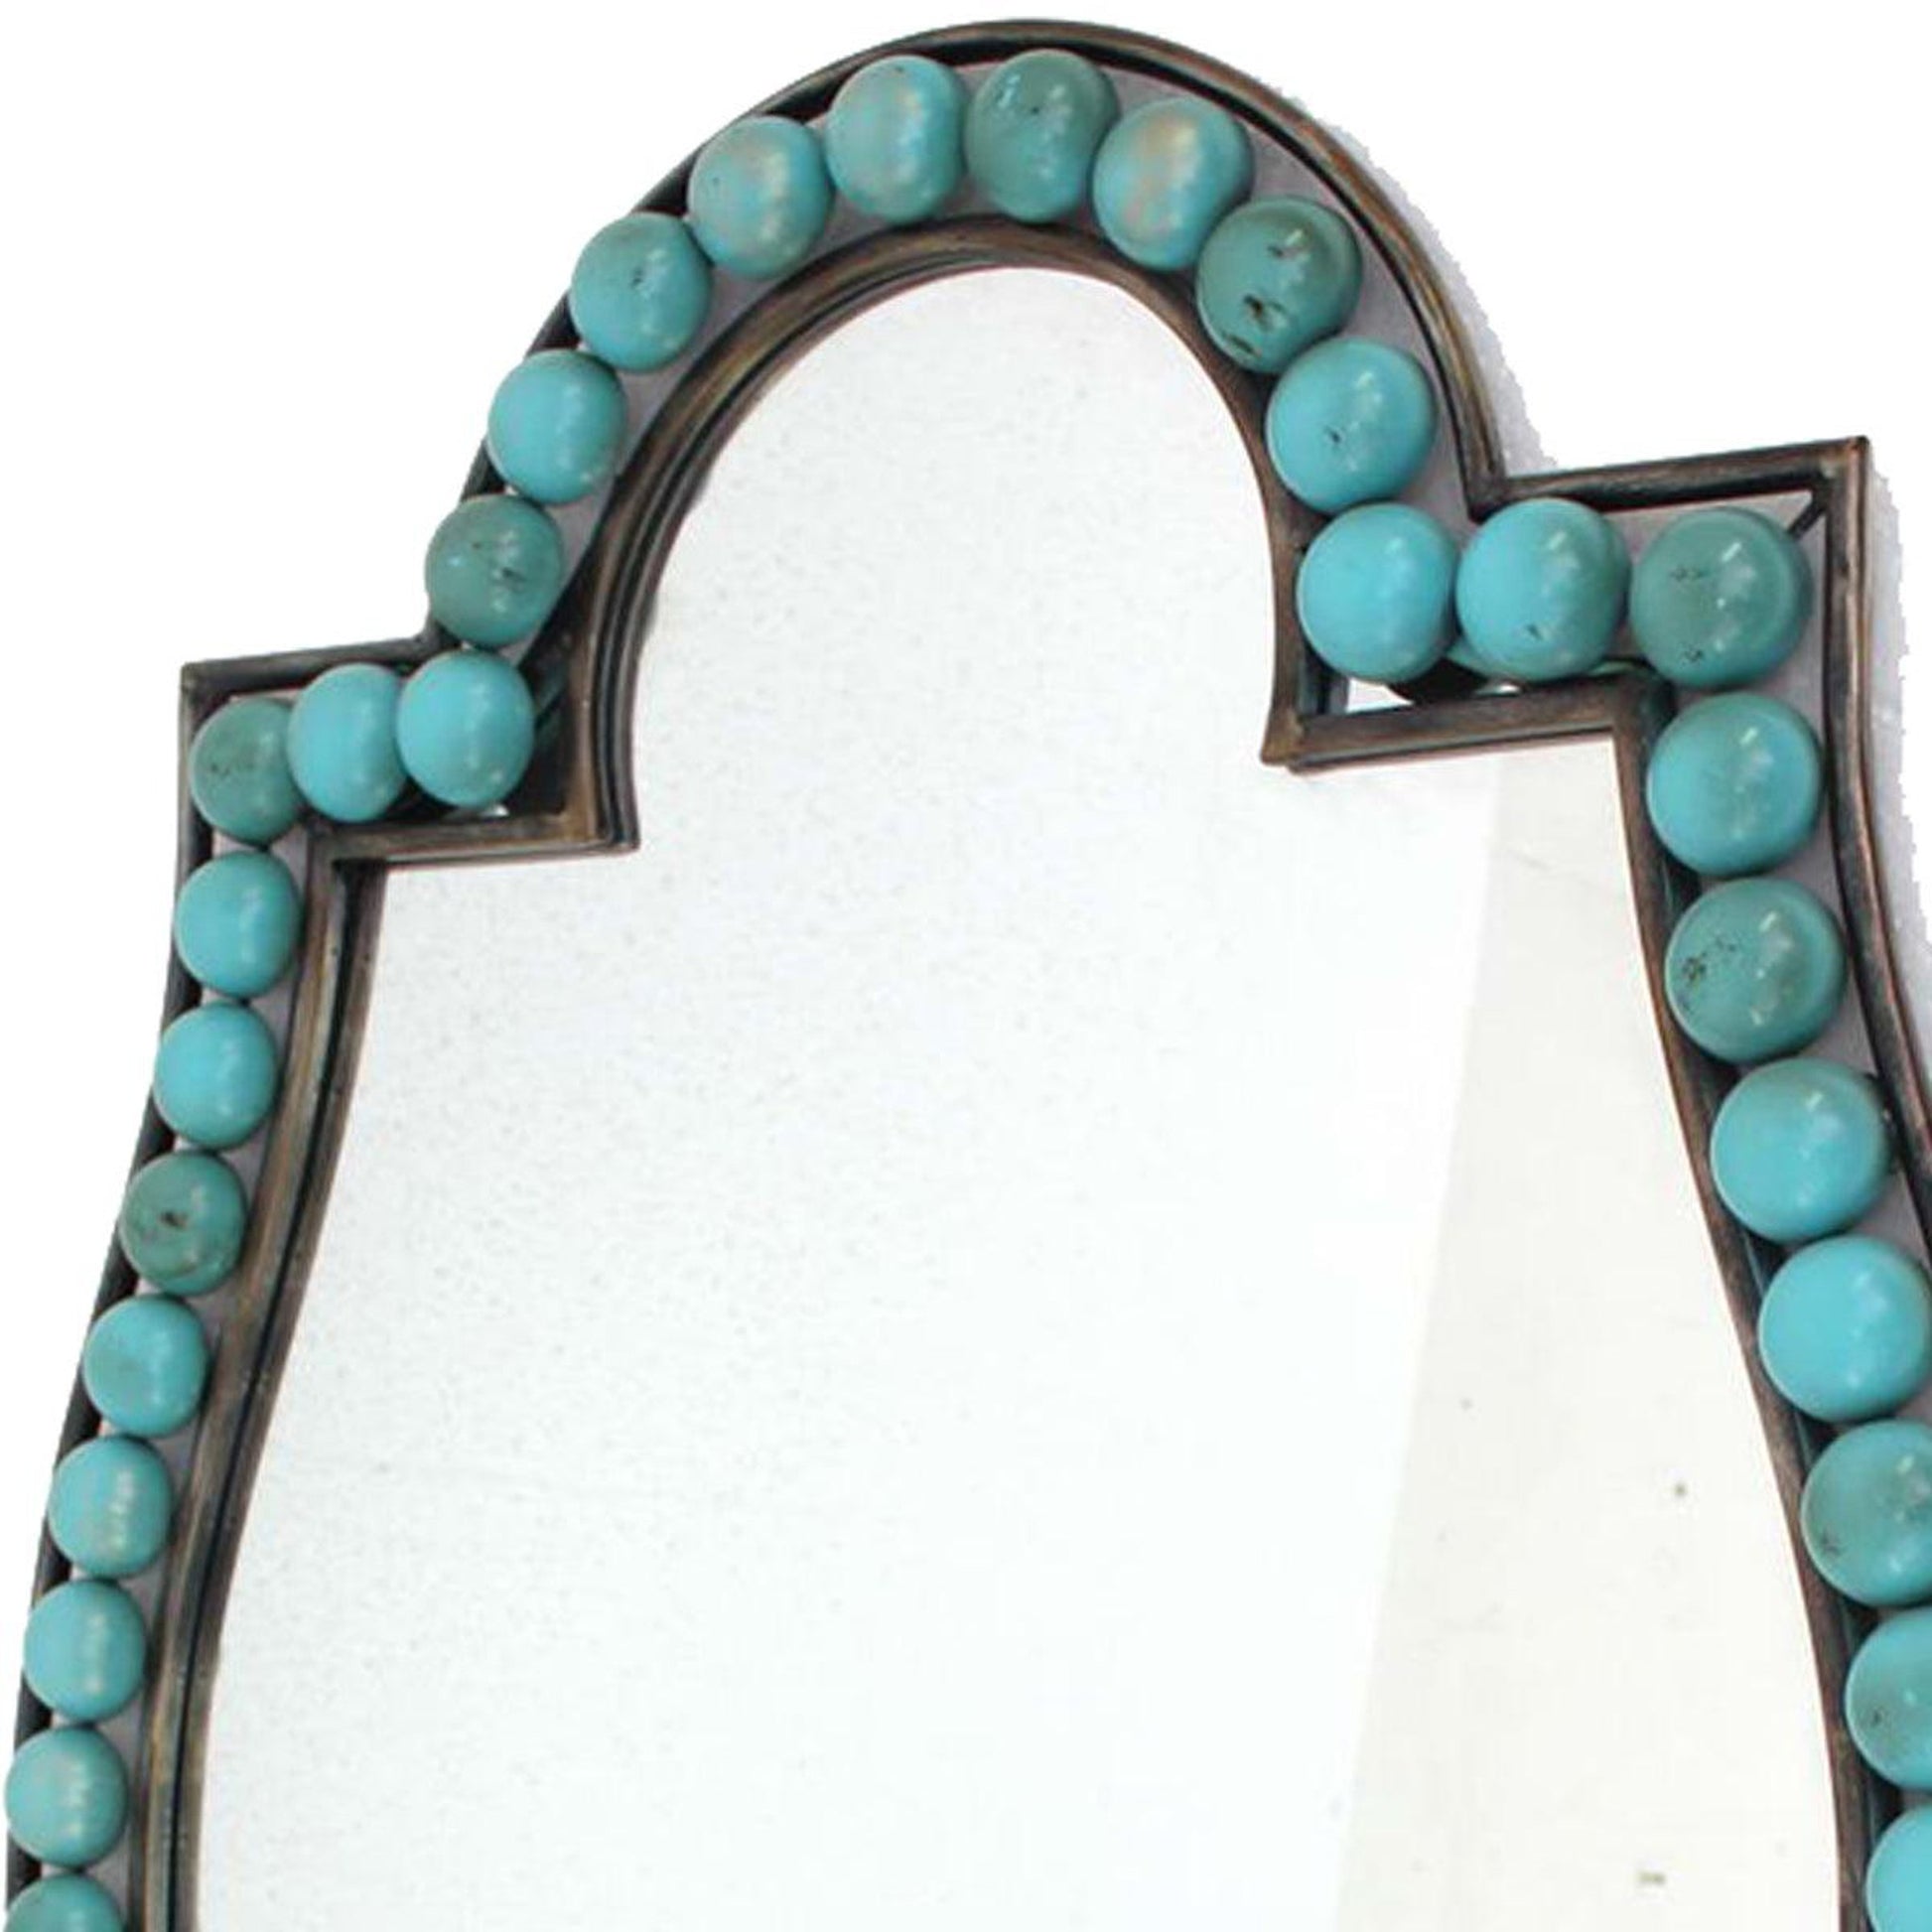 Benzara Blue and Brown Quatrefoil Shape Metal Wall Mirror With Pearl Accents